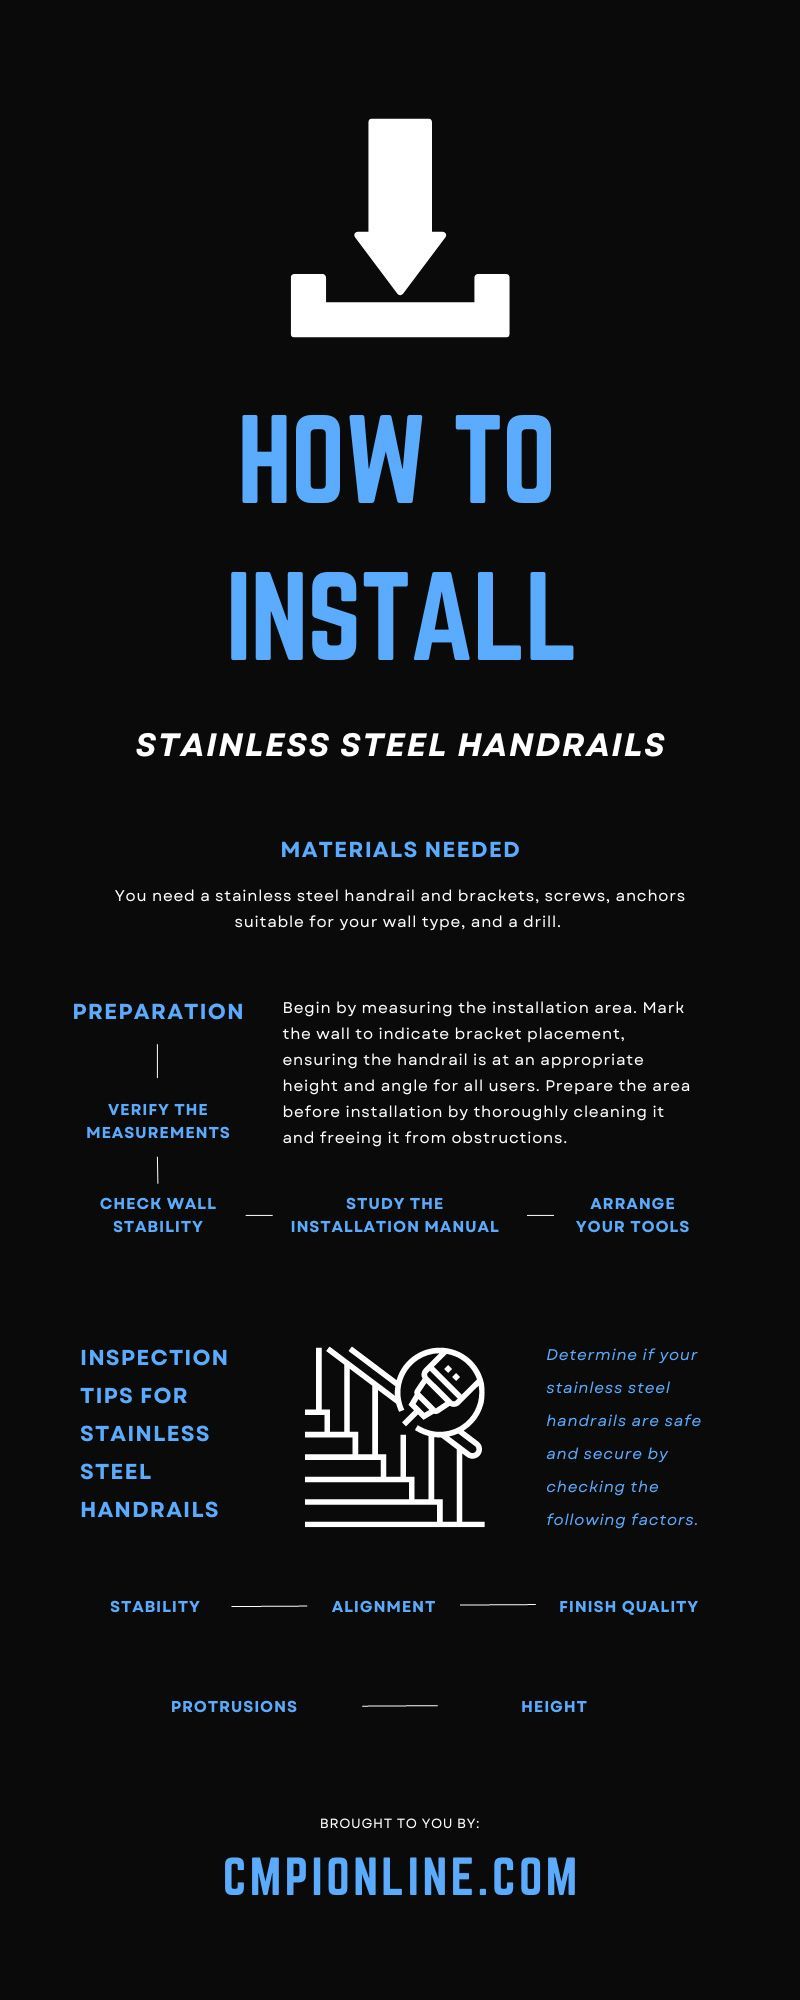 How To Install Stainless Steel Handrails